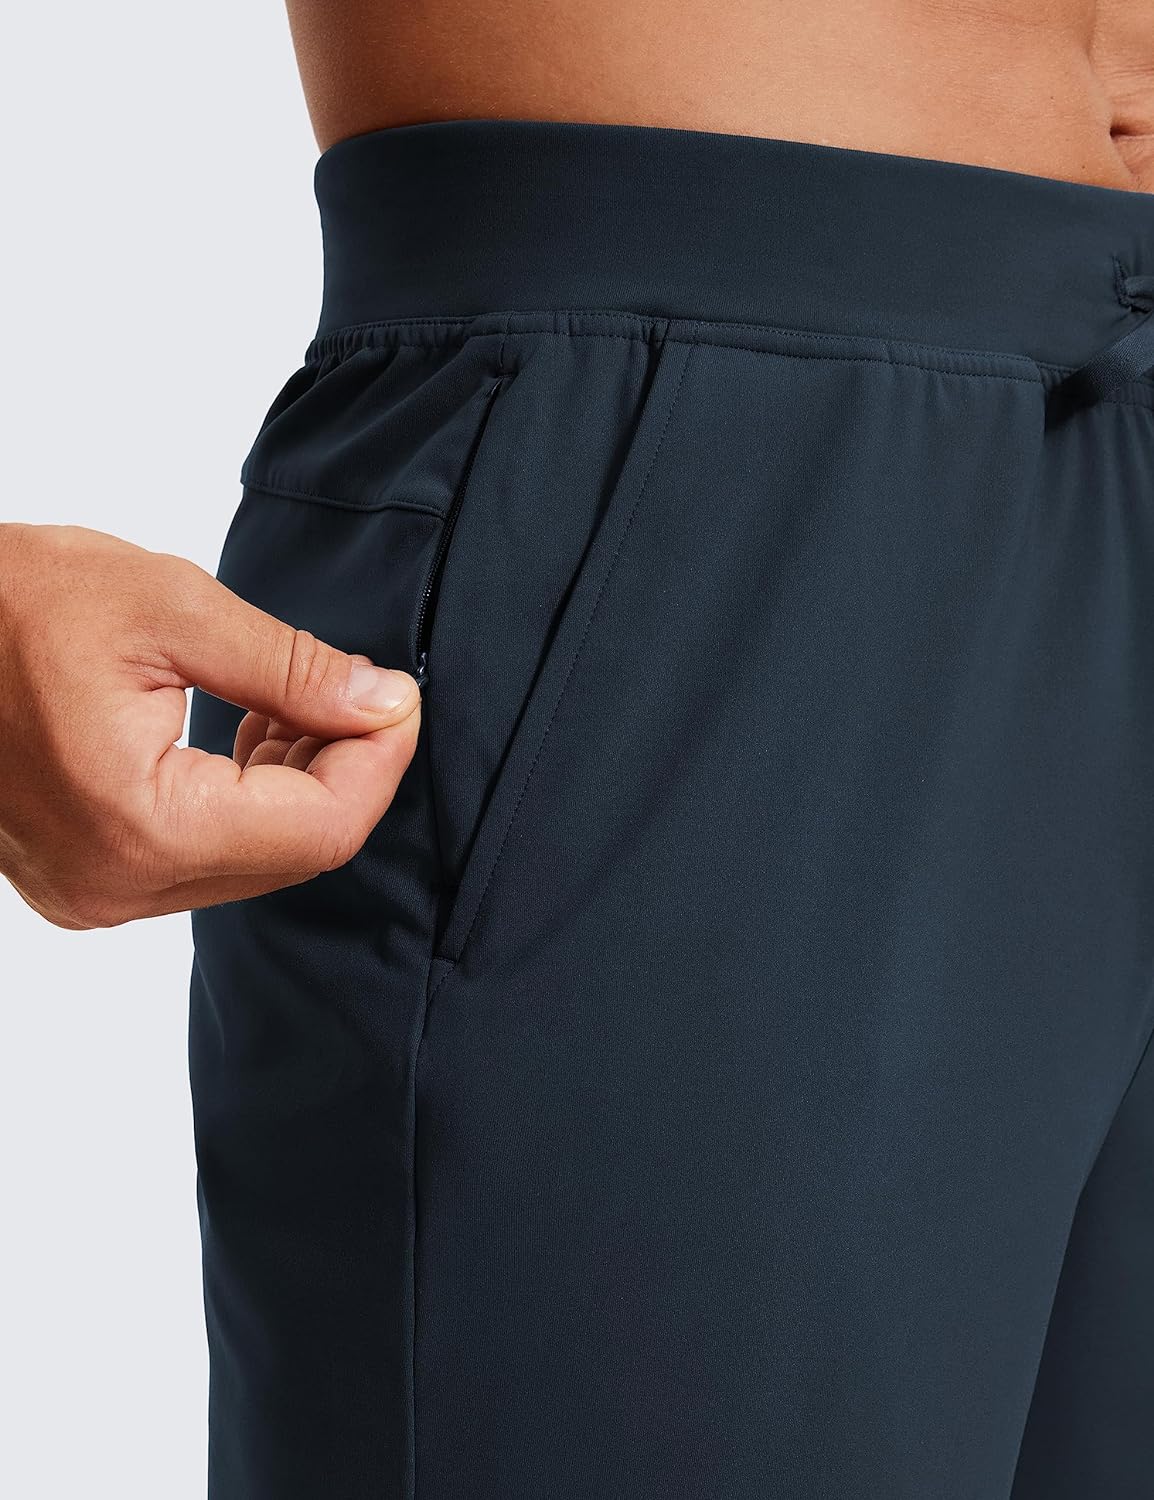 CRZ YOGA Men's Four-Way Stretch Workout Shorts - The Perfect Athletic Shorts for Versatile Performance